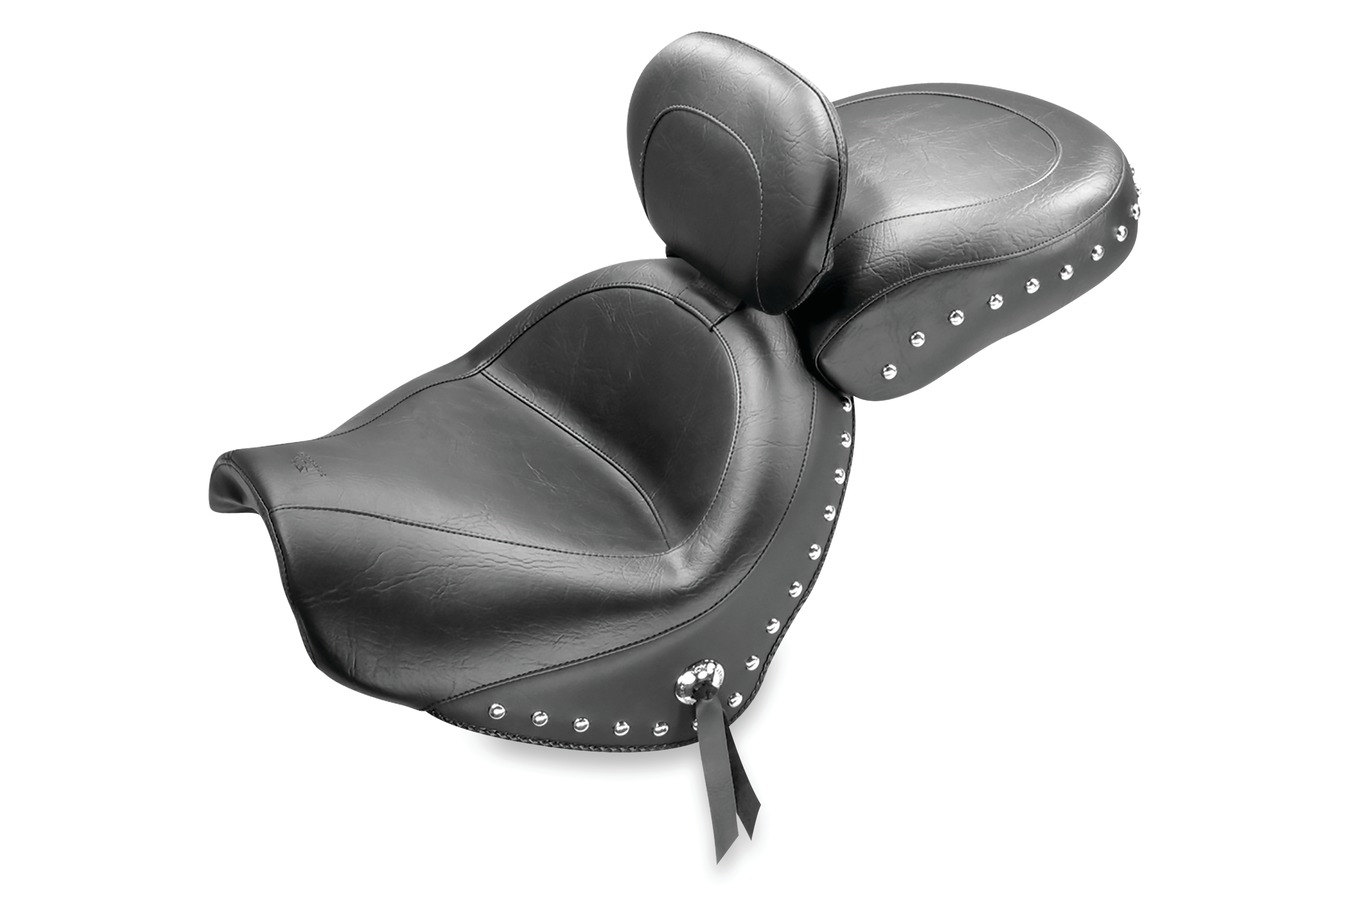 Standard Touring Two-Piece Seat with Driver Backrest for Suzuki Boulevard C50 2005-